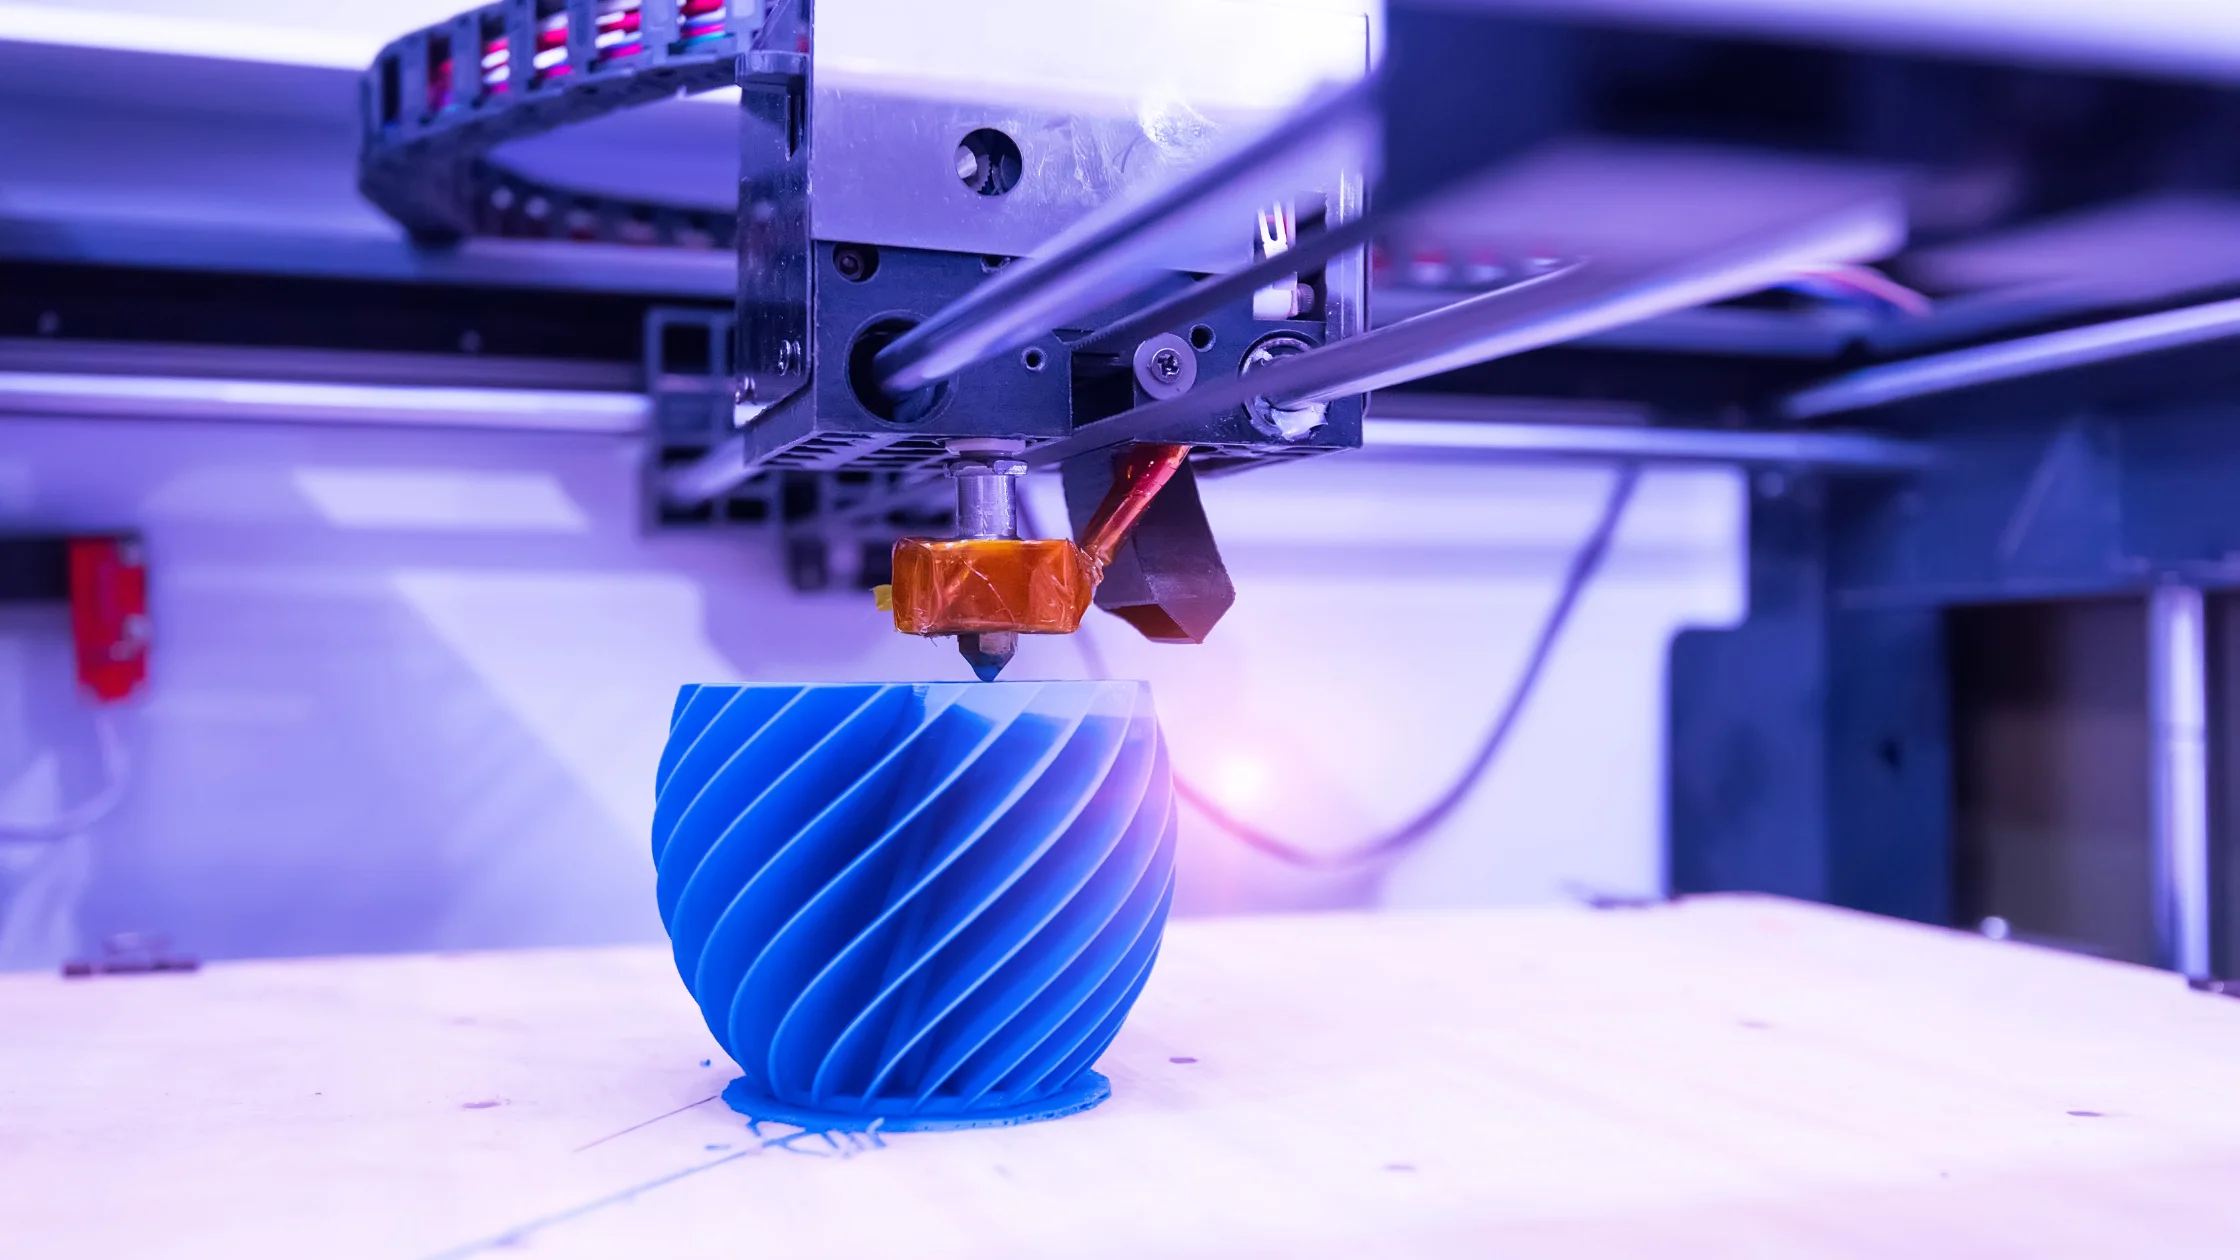 3D Printing Business Ideas